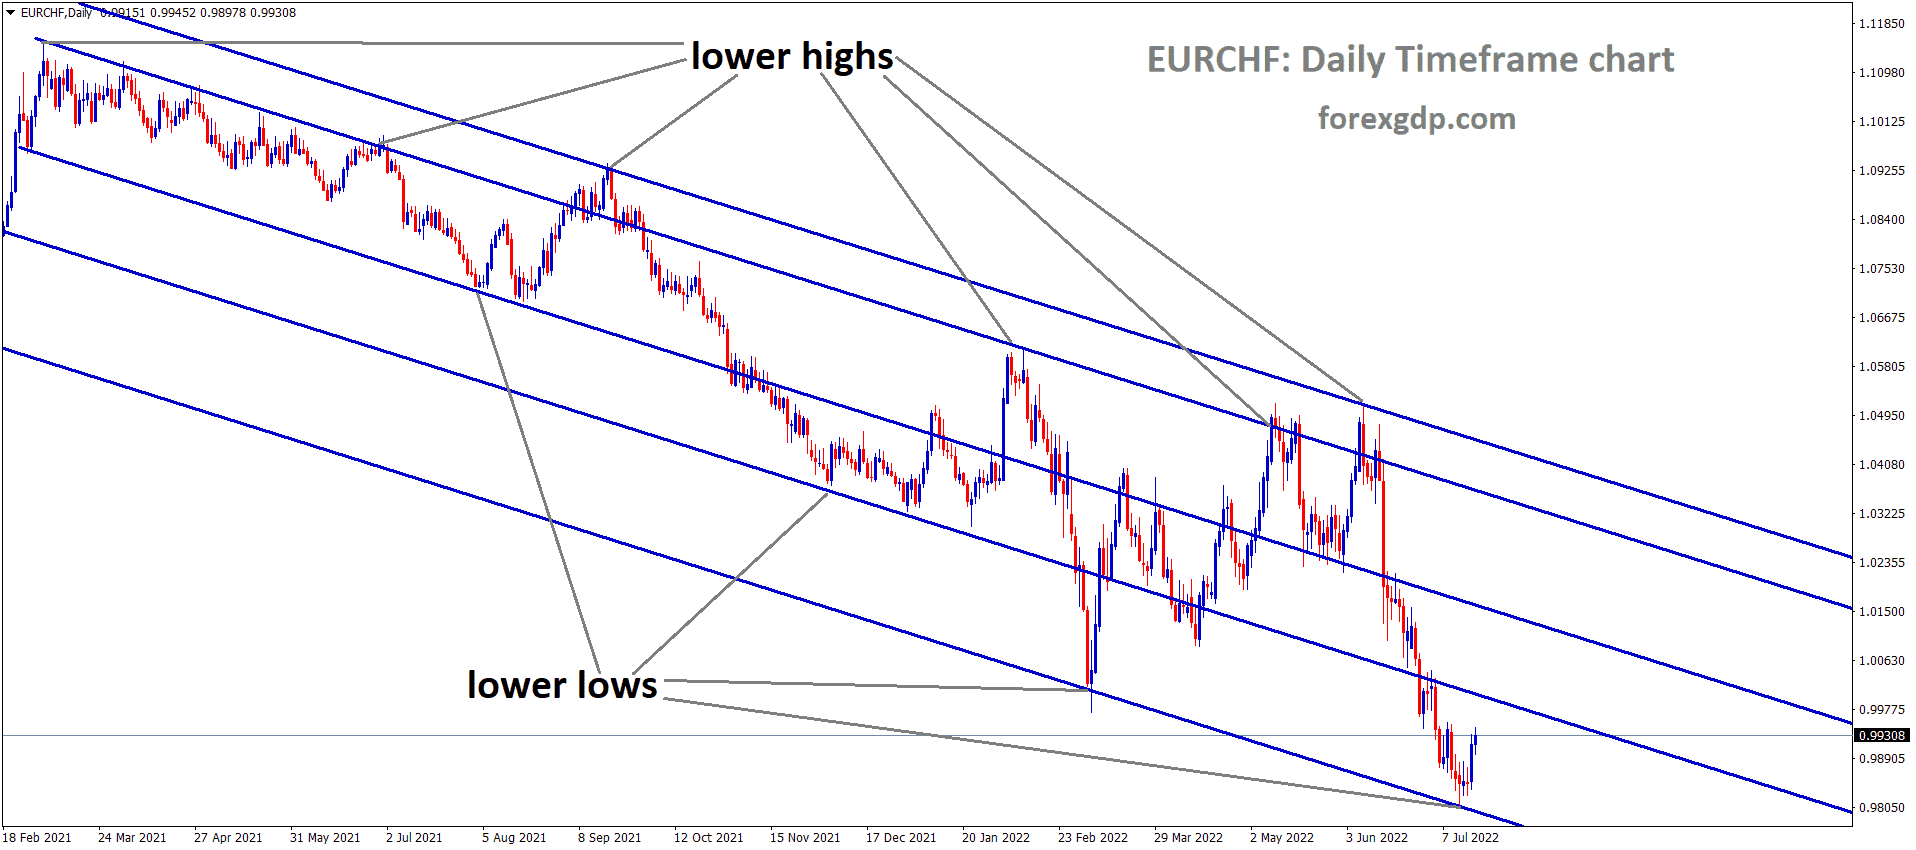 EURCHF Daily TF Analysis Market is moving in the Descending channel and the market has rebounded from the lower low area of the channel